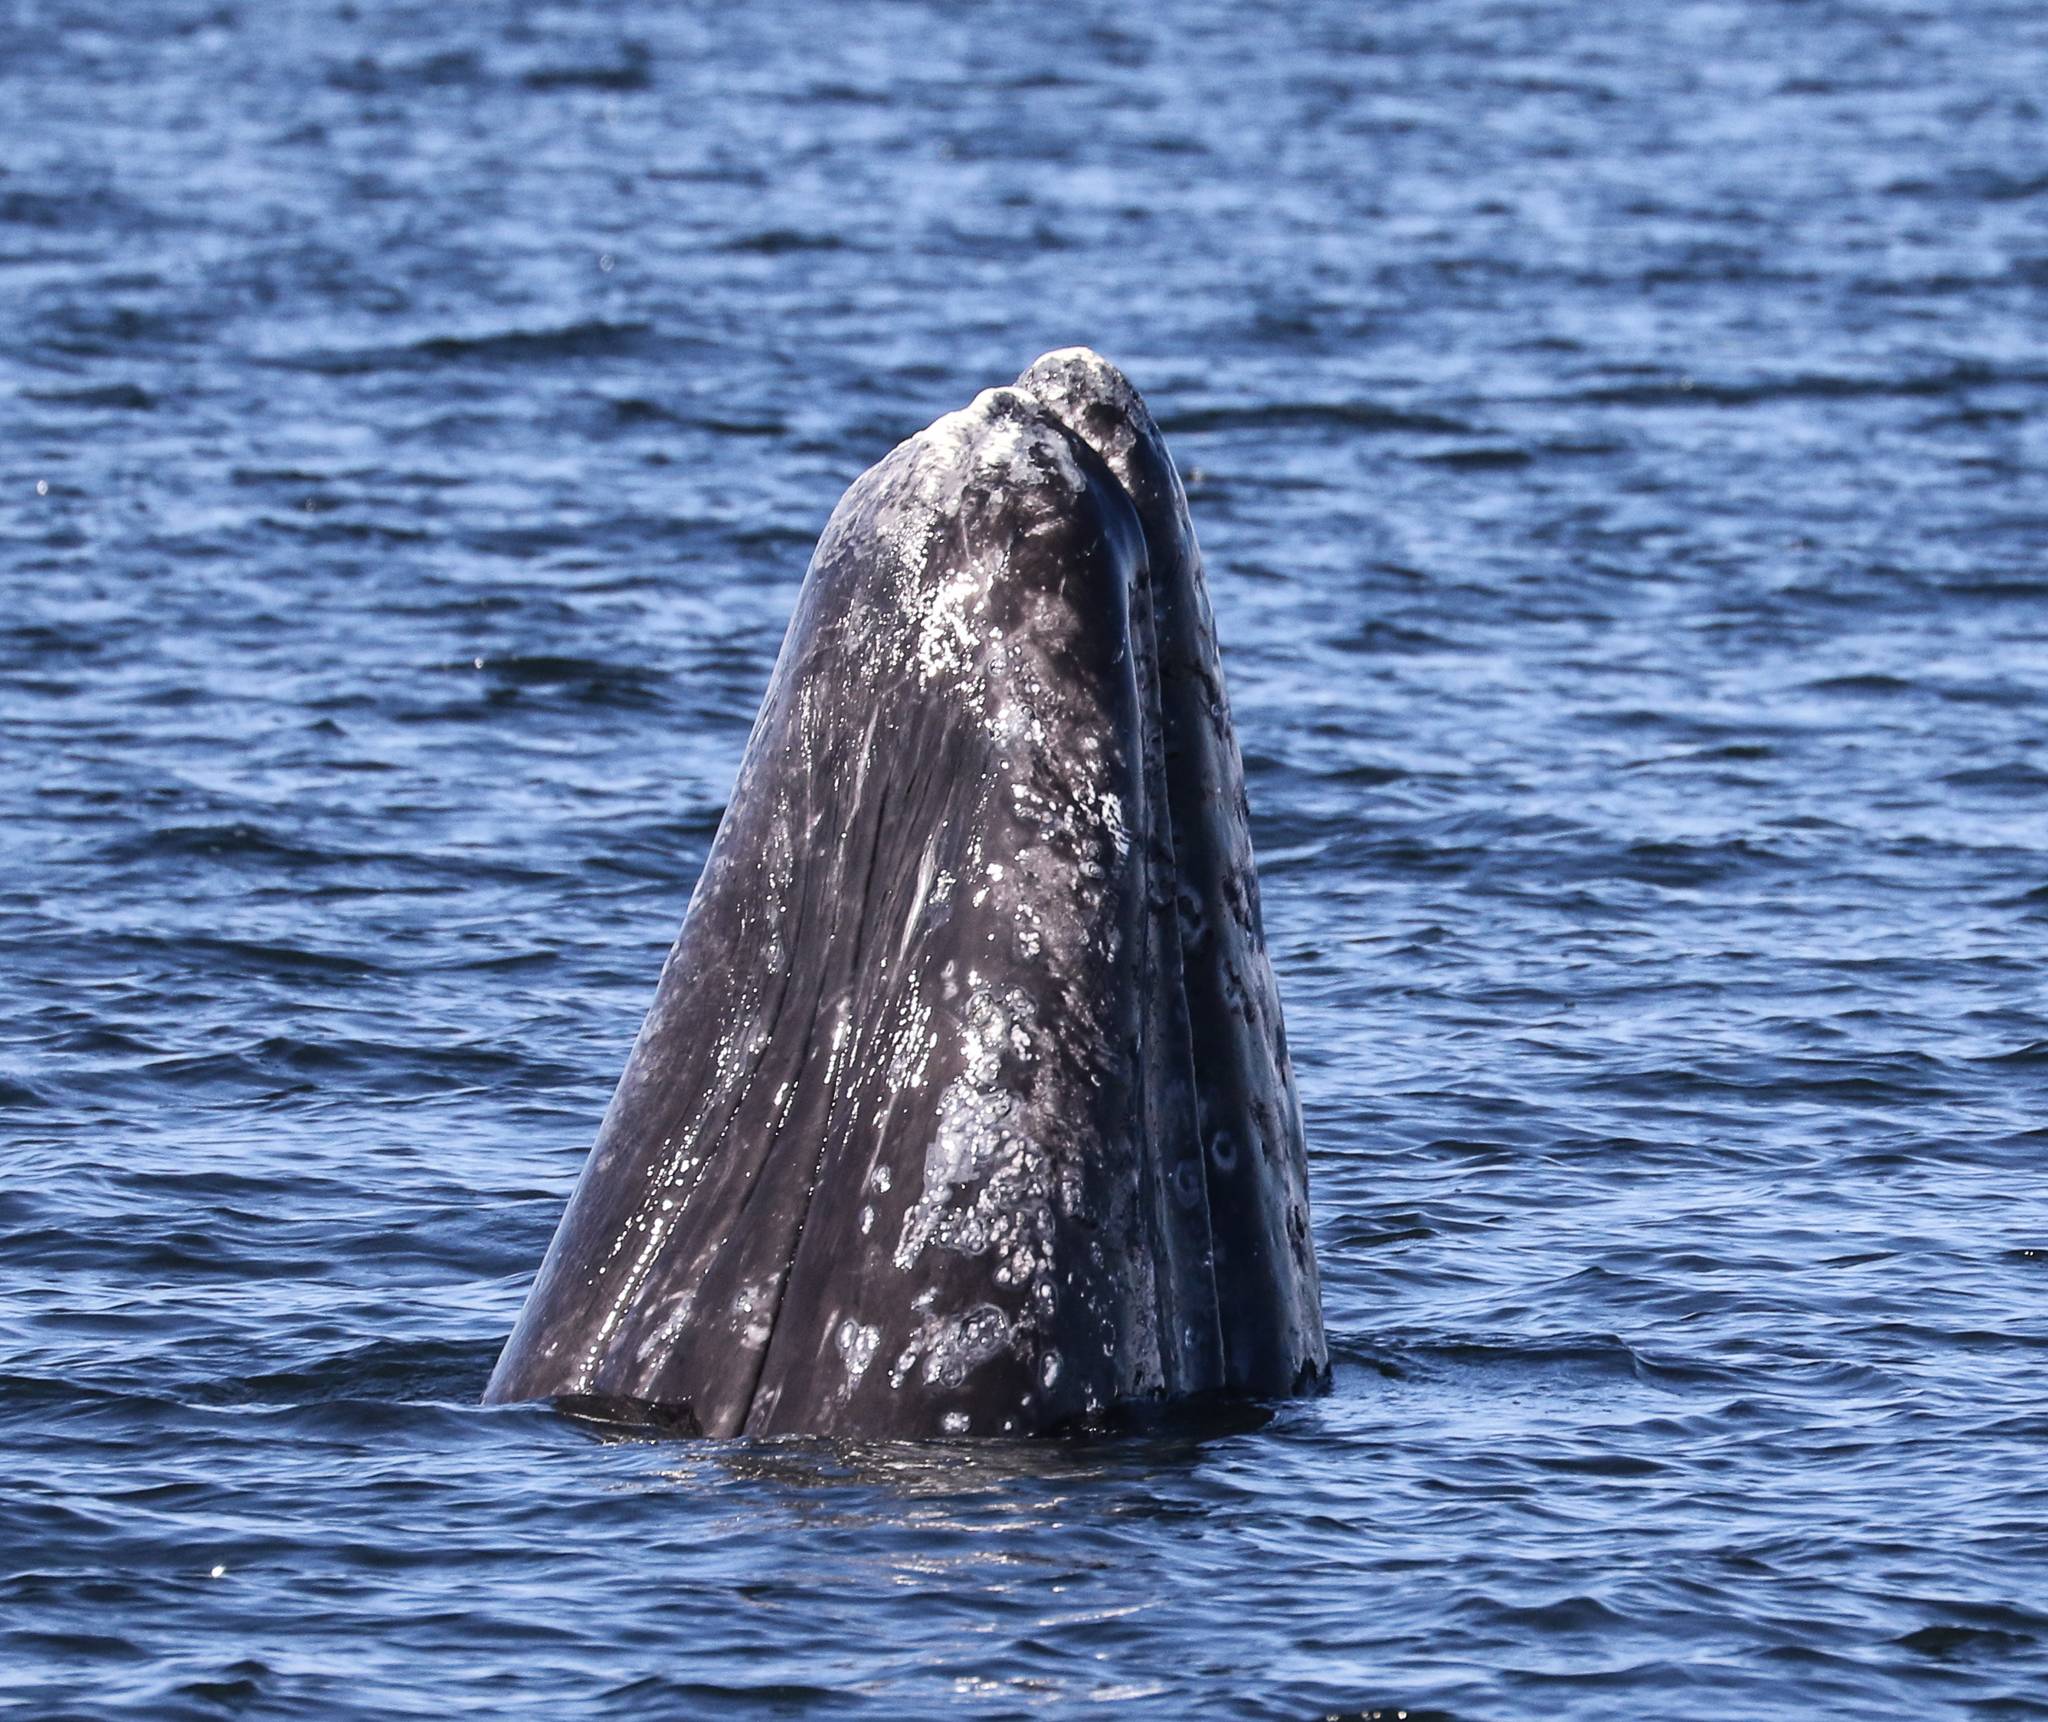 A gray whale rises from the water in Saratoga Passage. Photo by Jill Hein